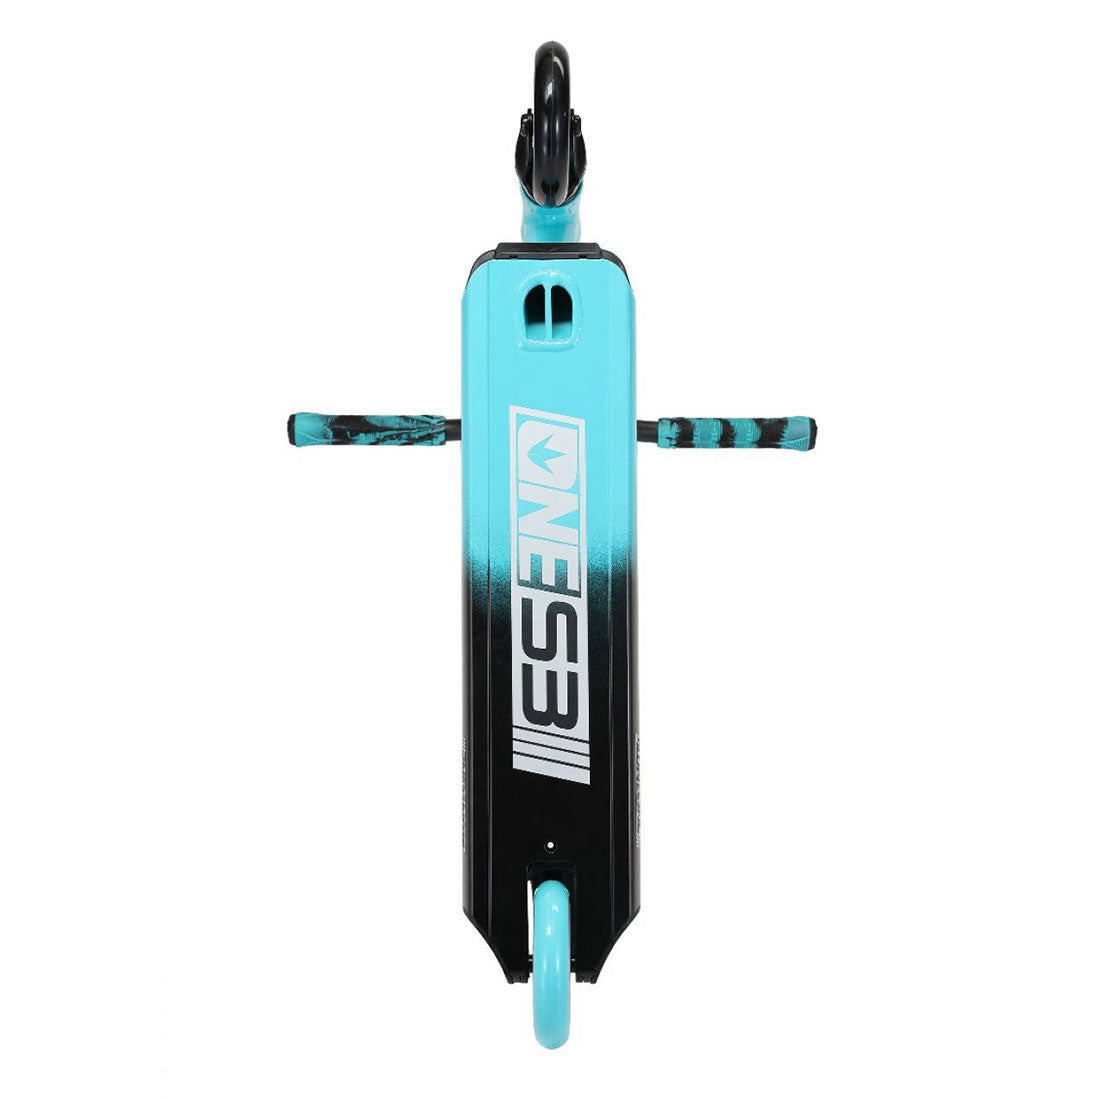 Envy ONE S3 Complete - Teal/Black Scooter Completes Trick